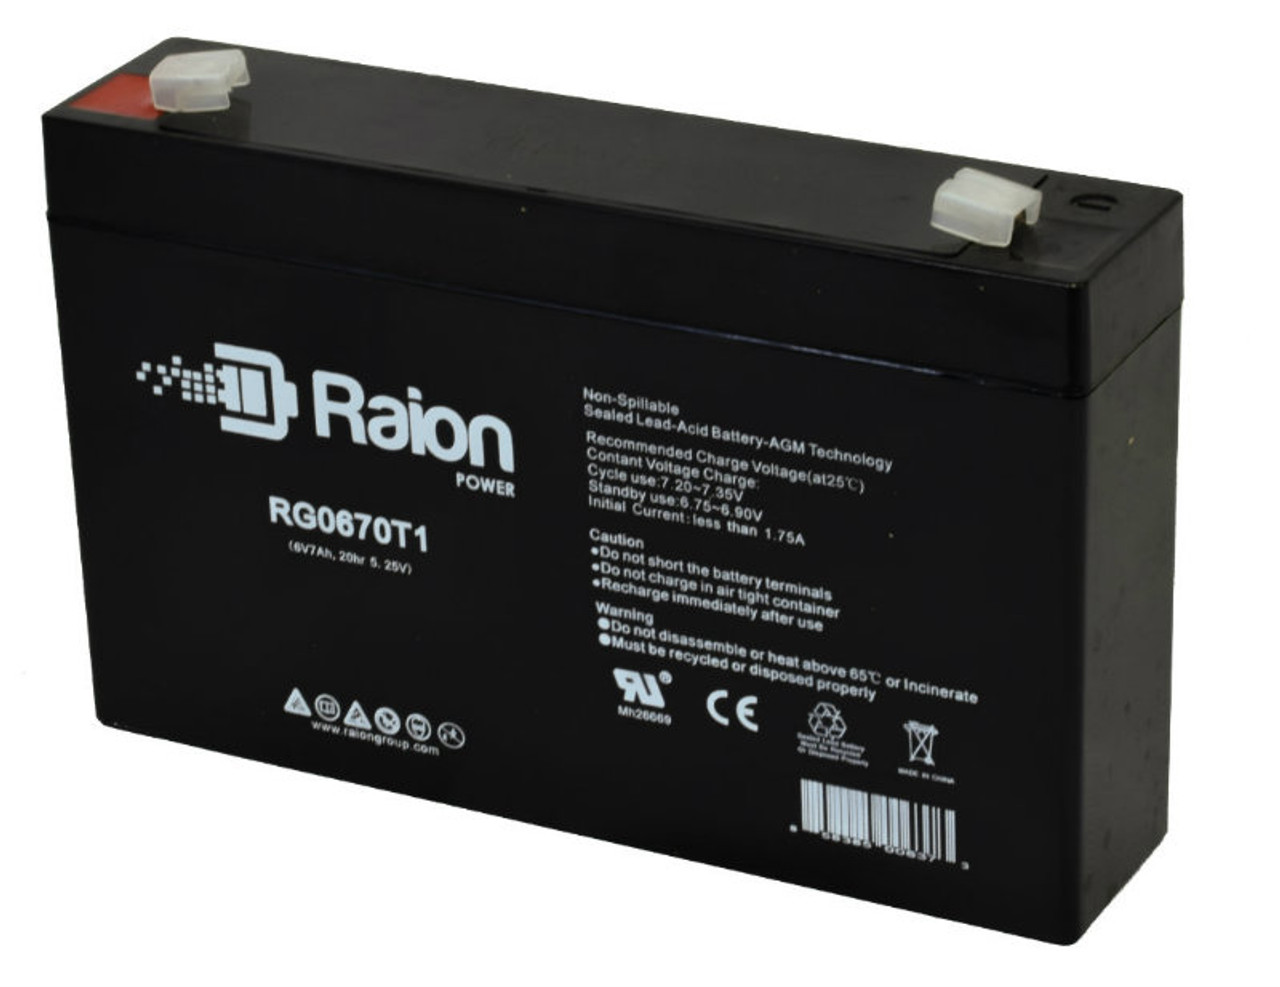 Raion Power RG0670T1 6V 7Ah Replacement Battery Cartridge for Ivy Biomedical Systems 700 Monitor Medical Equipment